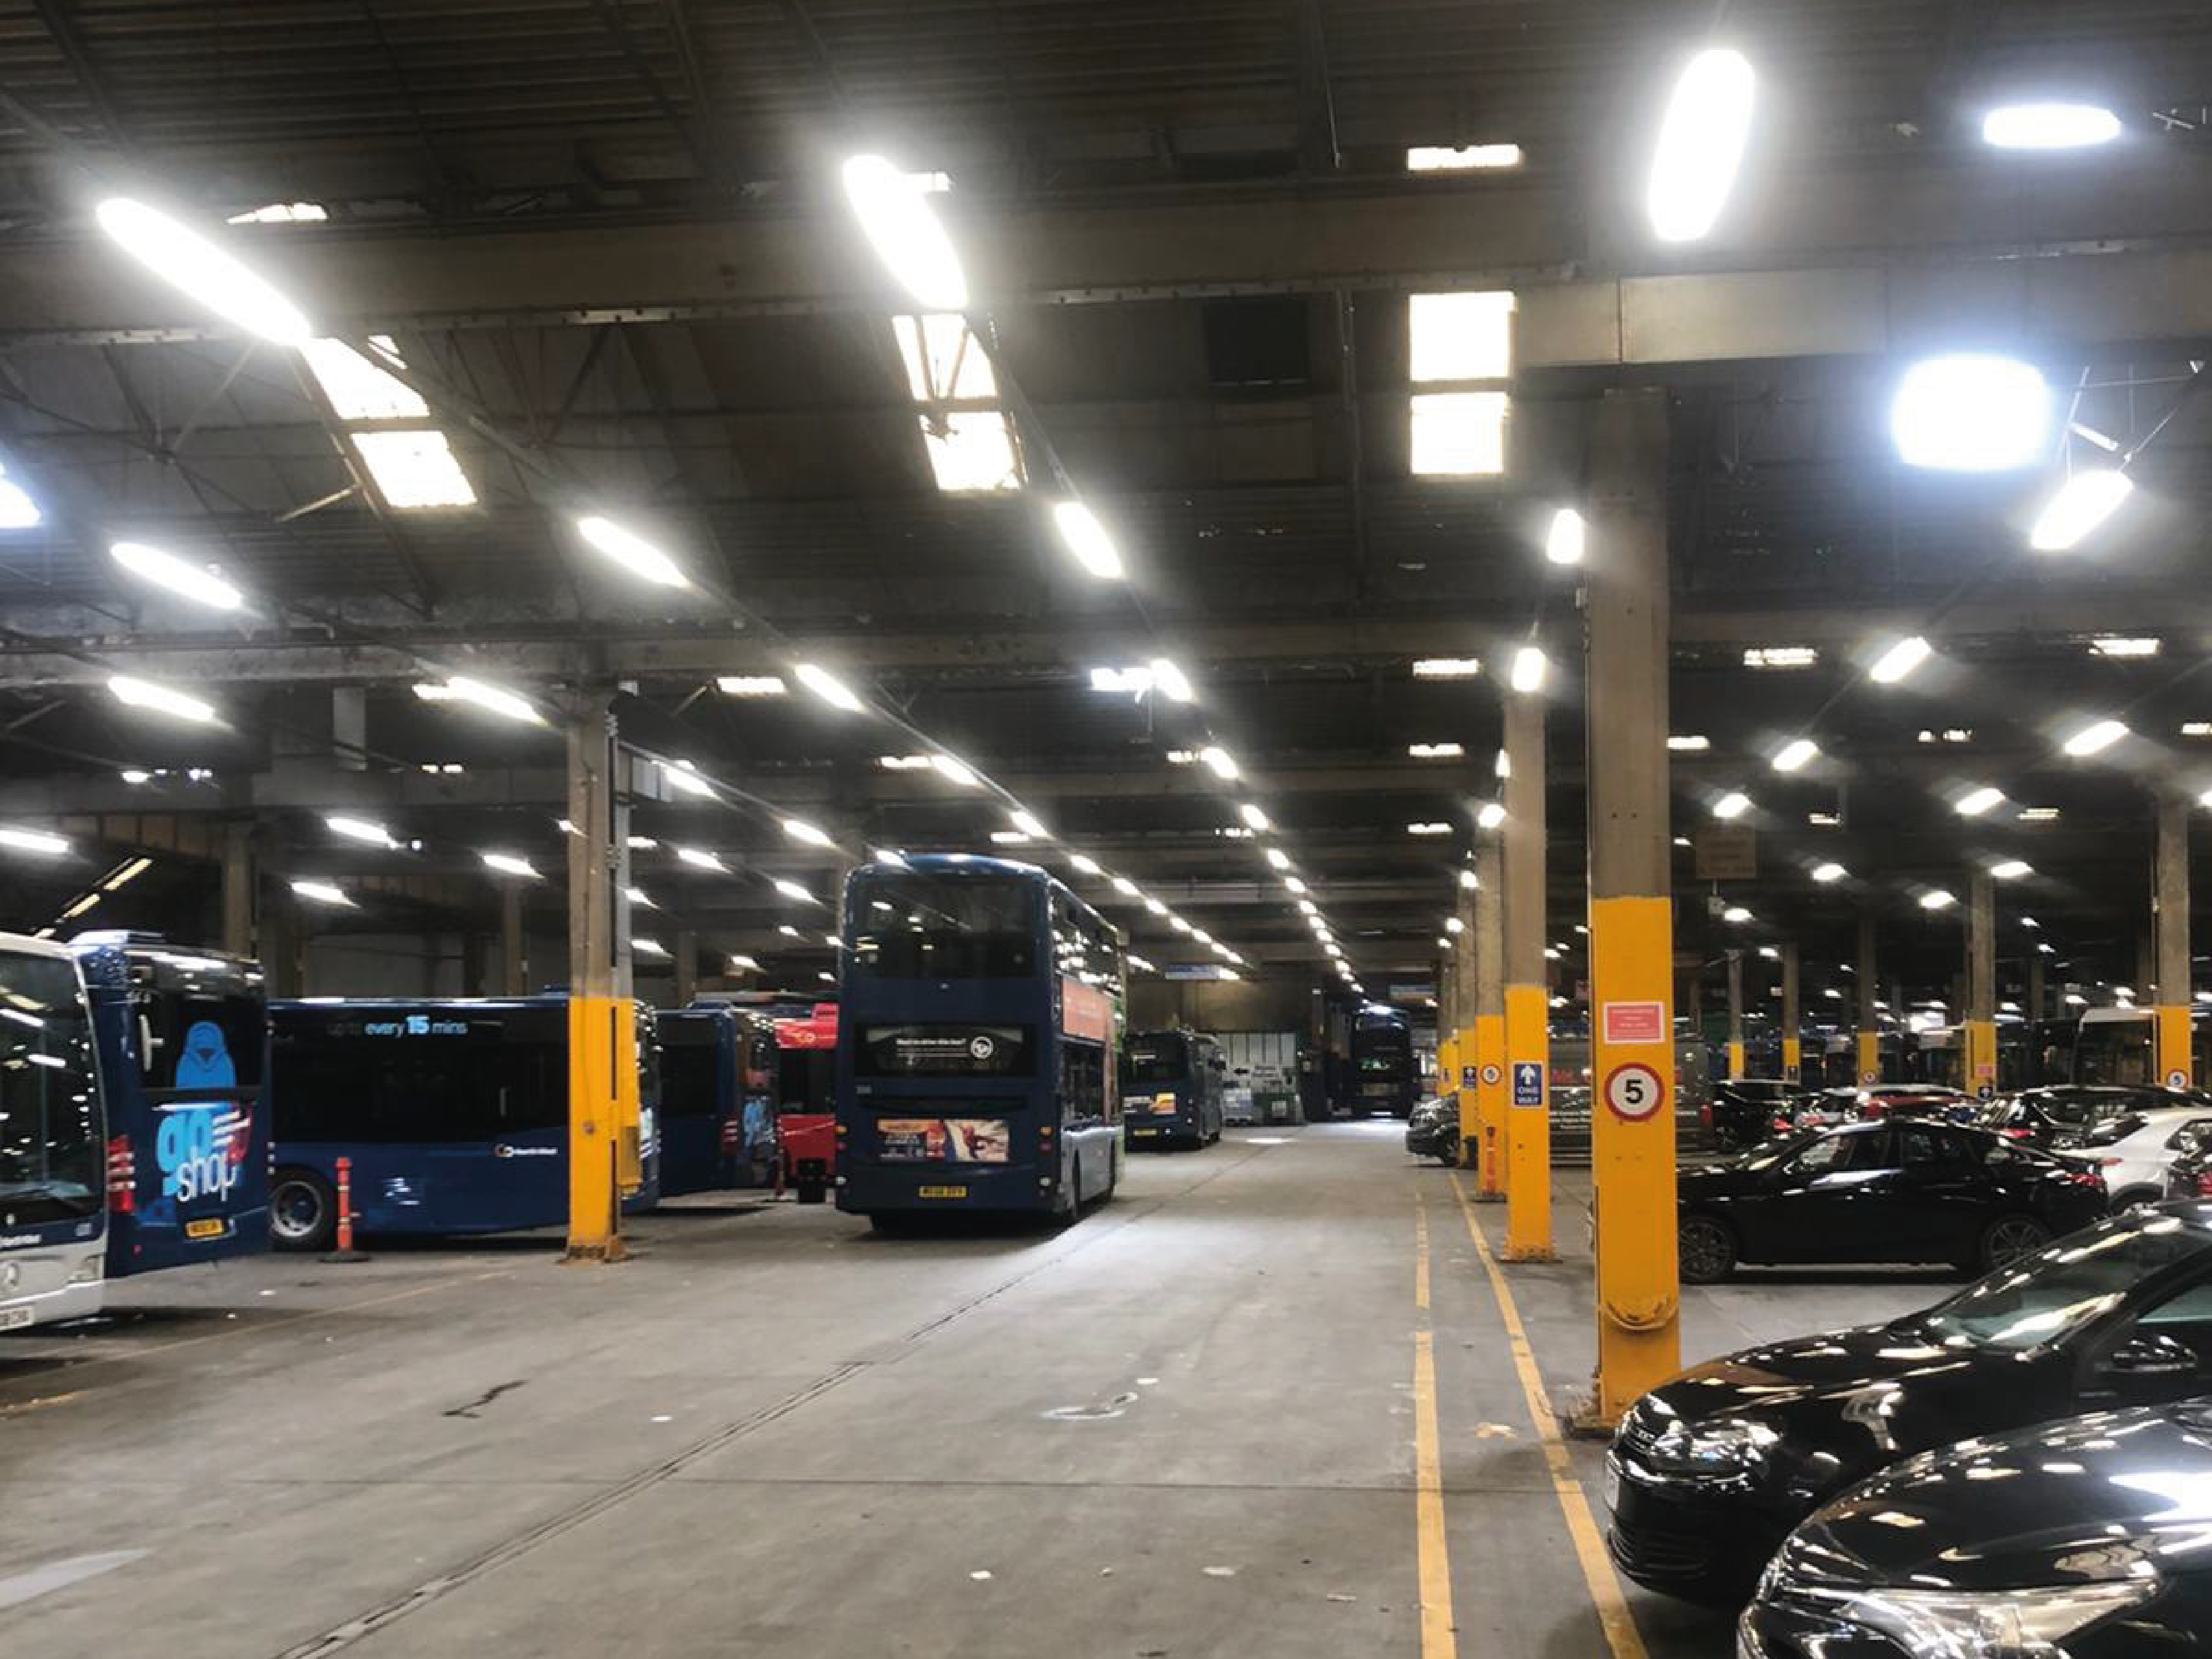 Go North West bus depot after picture of EES Group LED installation